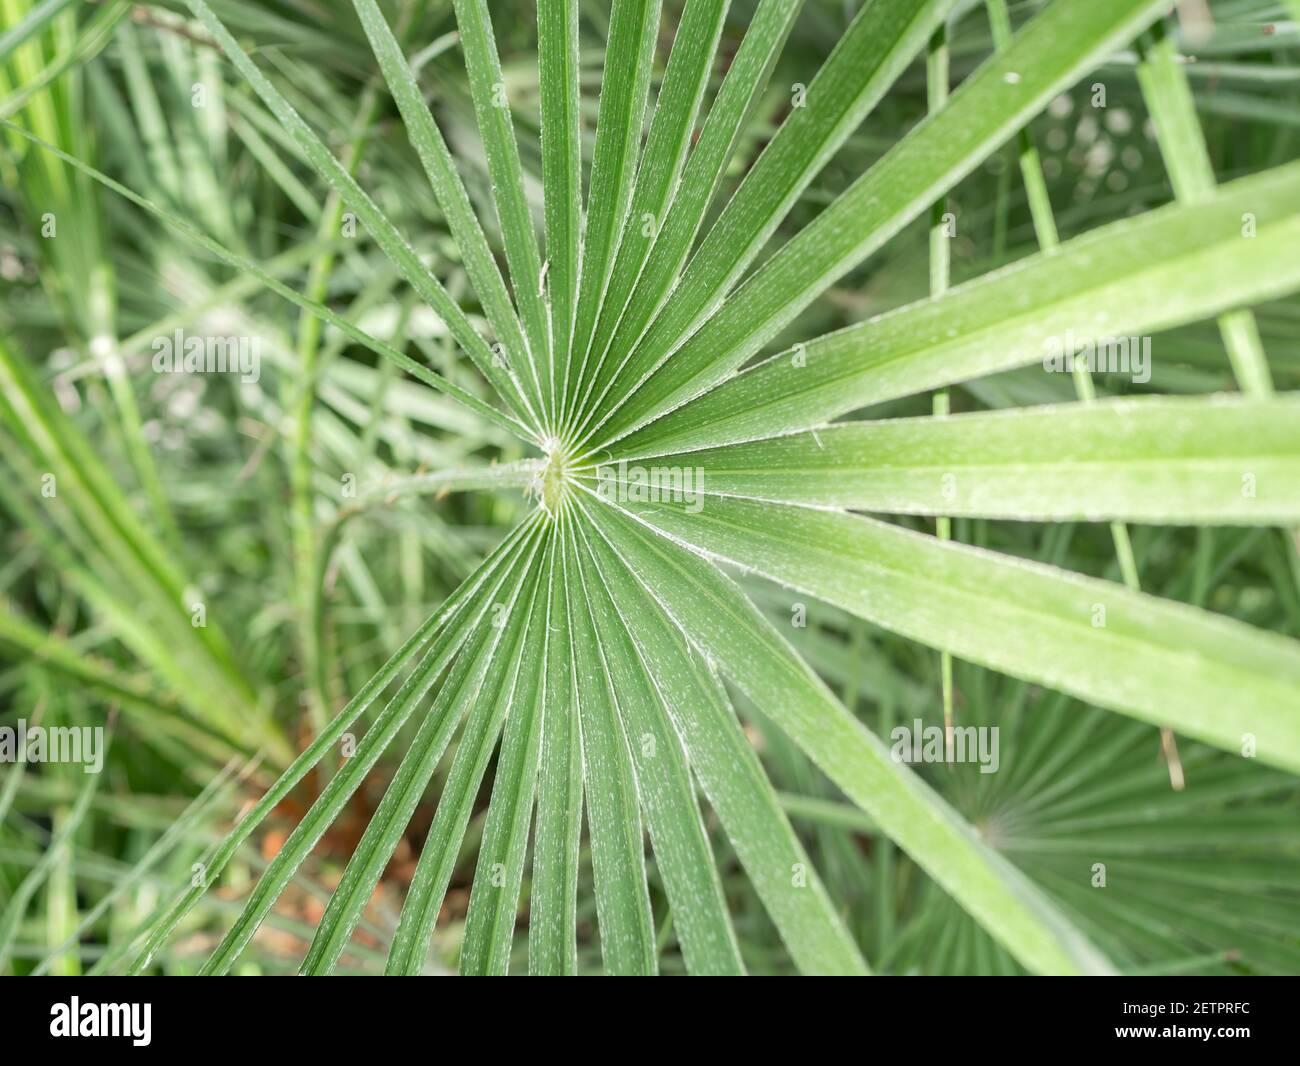 Close up detail with the foliage of Chamaerops humilis also known as European fan palm Stock Photo